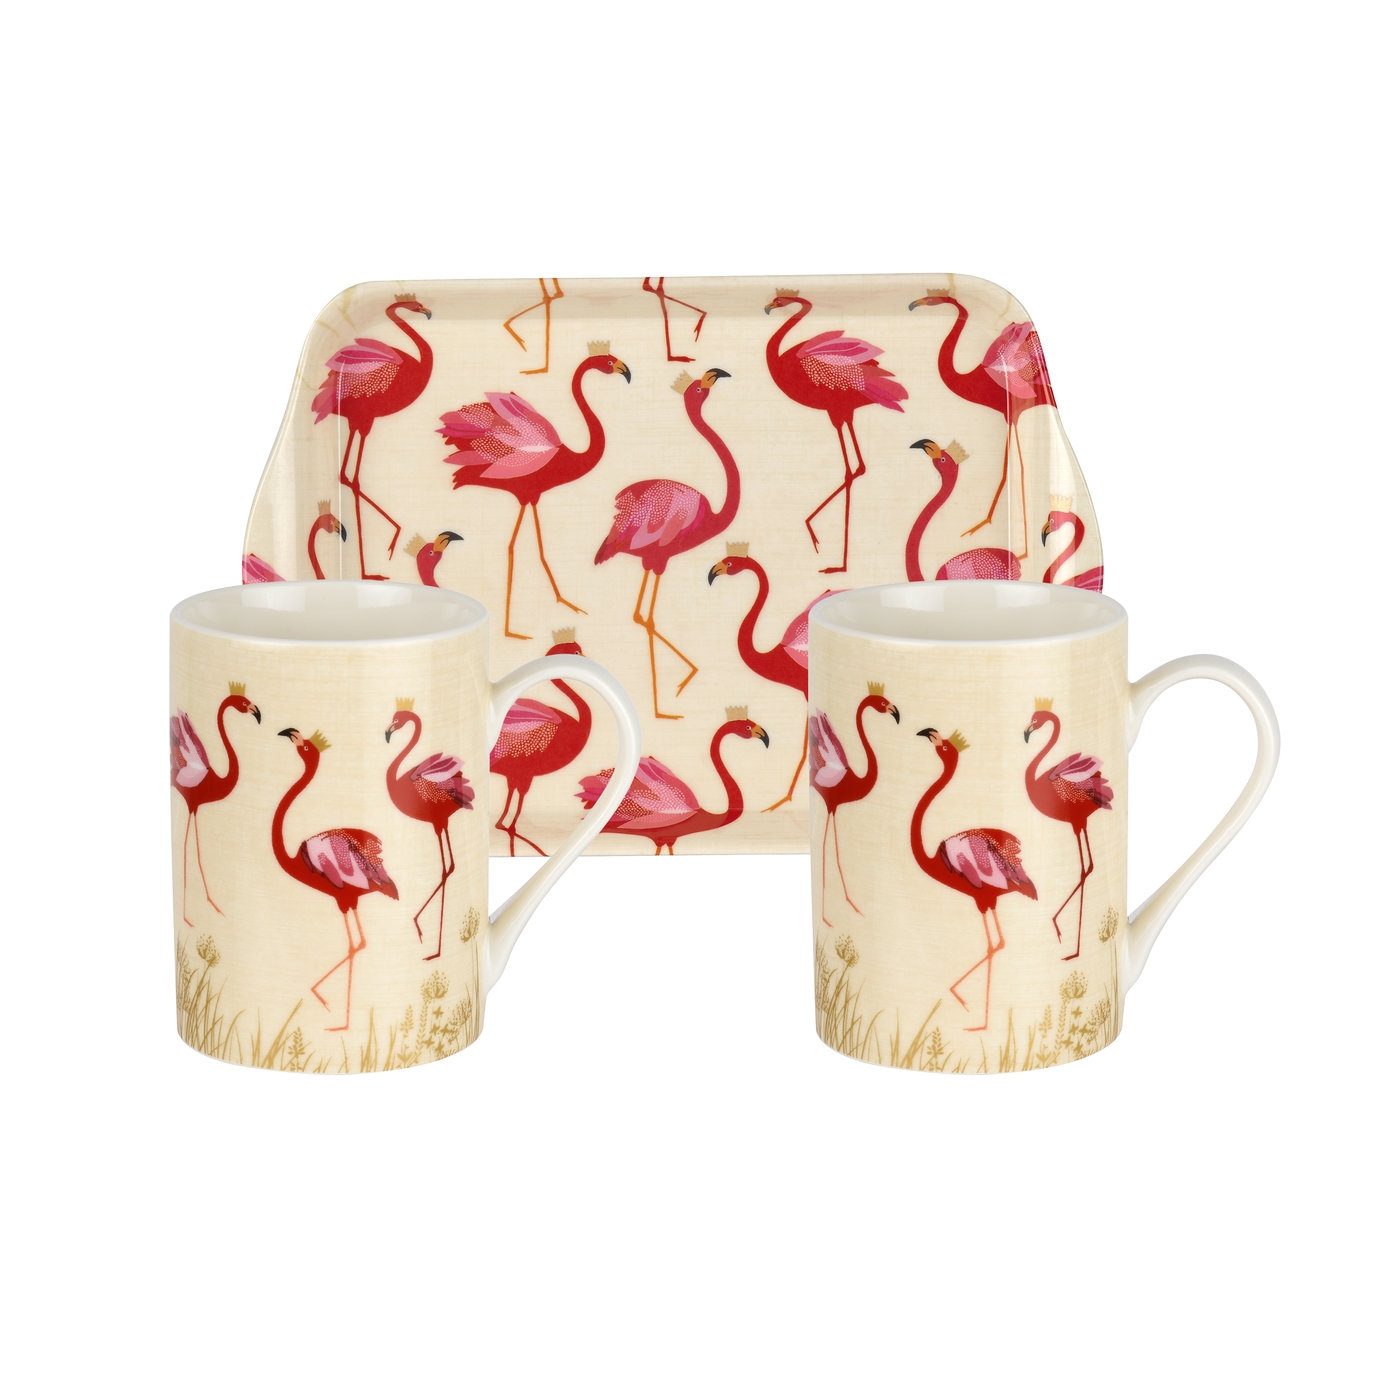 Sara Miller London for Pimpernel Flamingo Set of 2 Mugs and Tray image number null